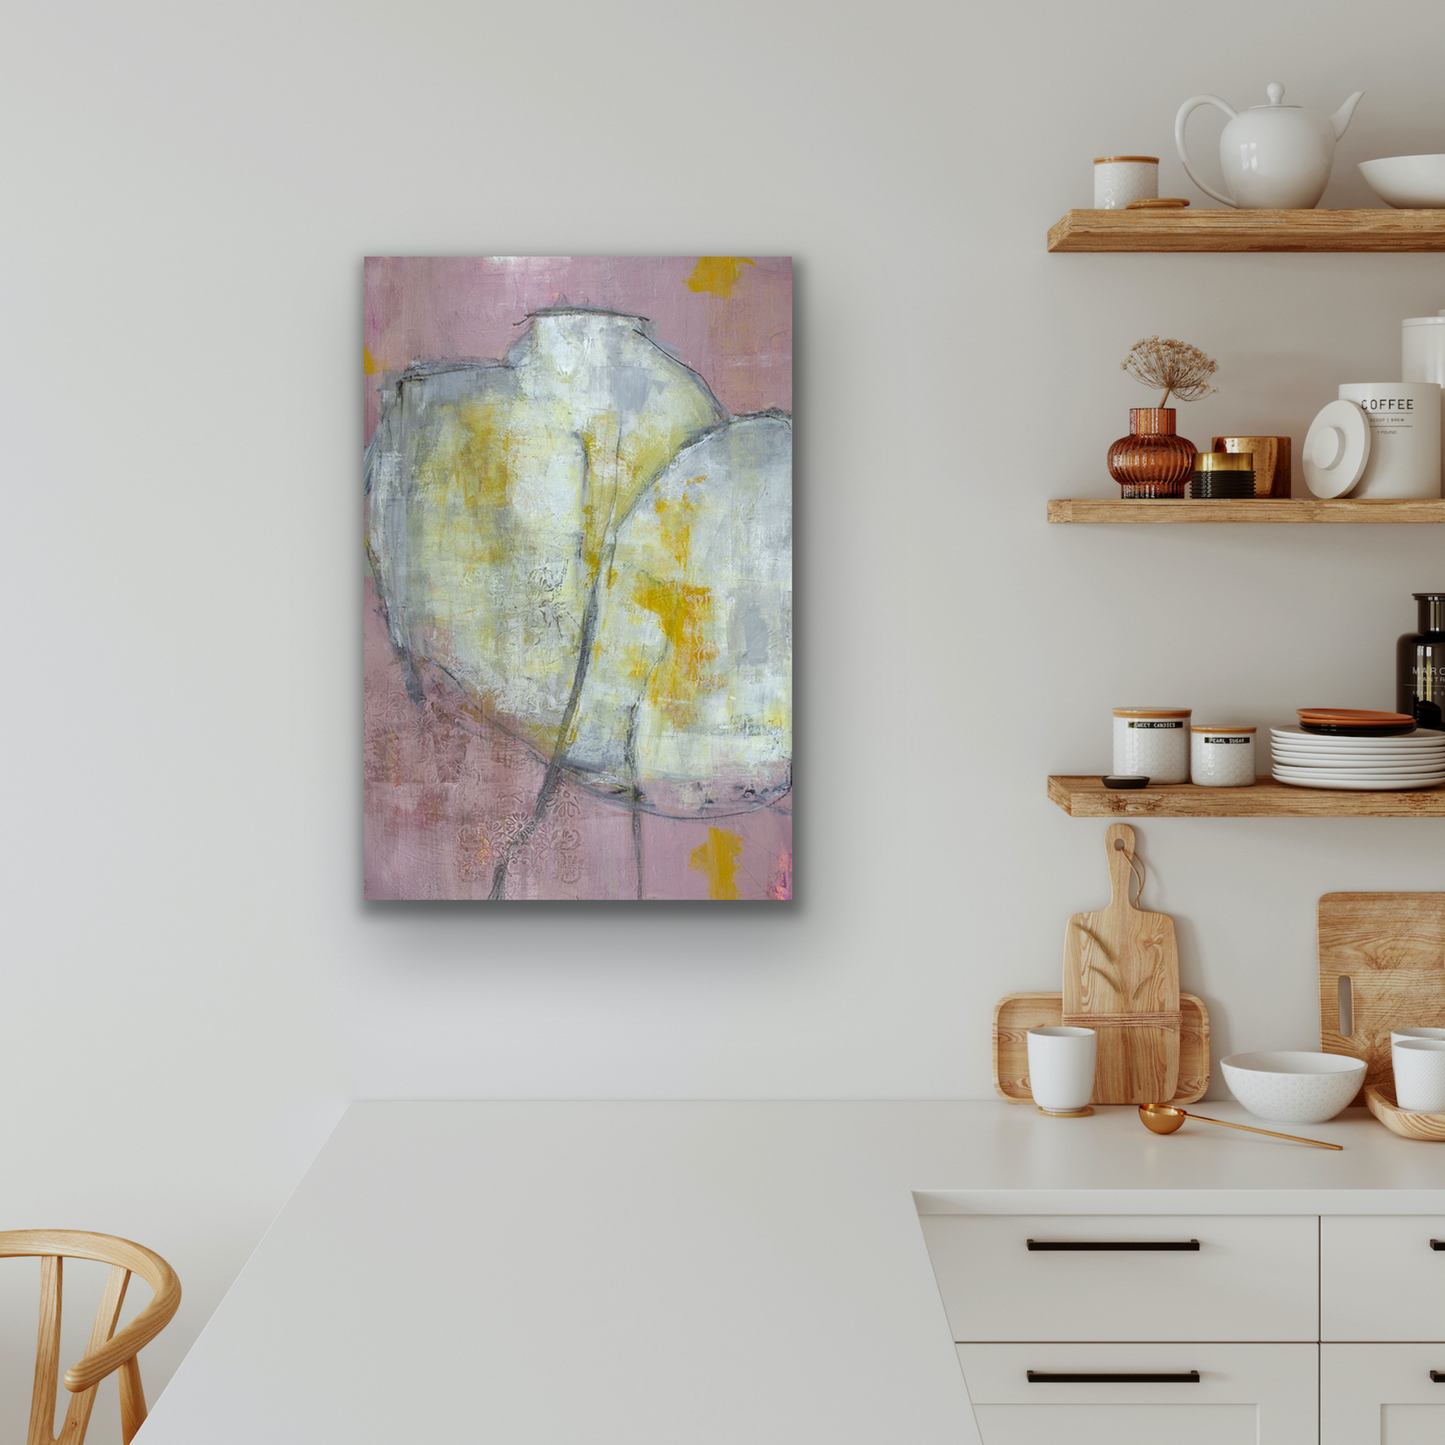 "Captured" work of art with its soft colours will work in many room of your home.